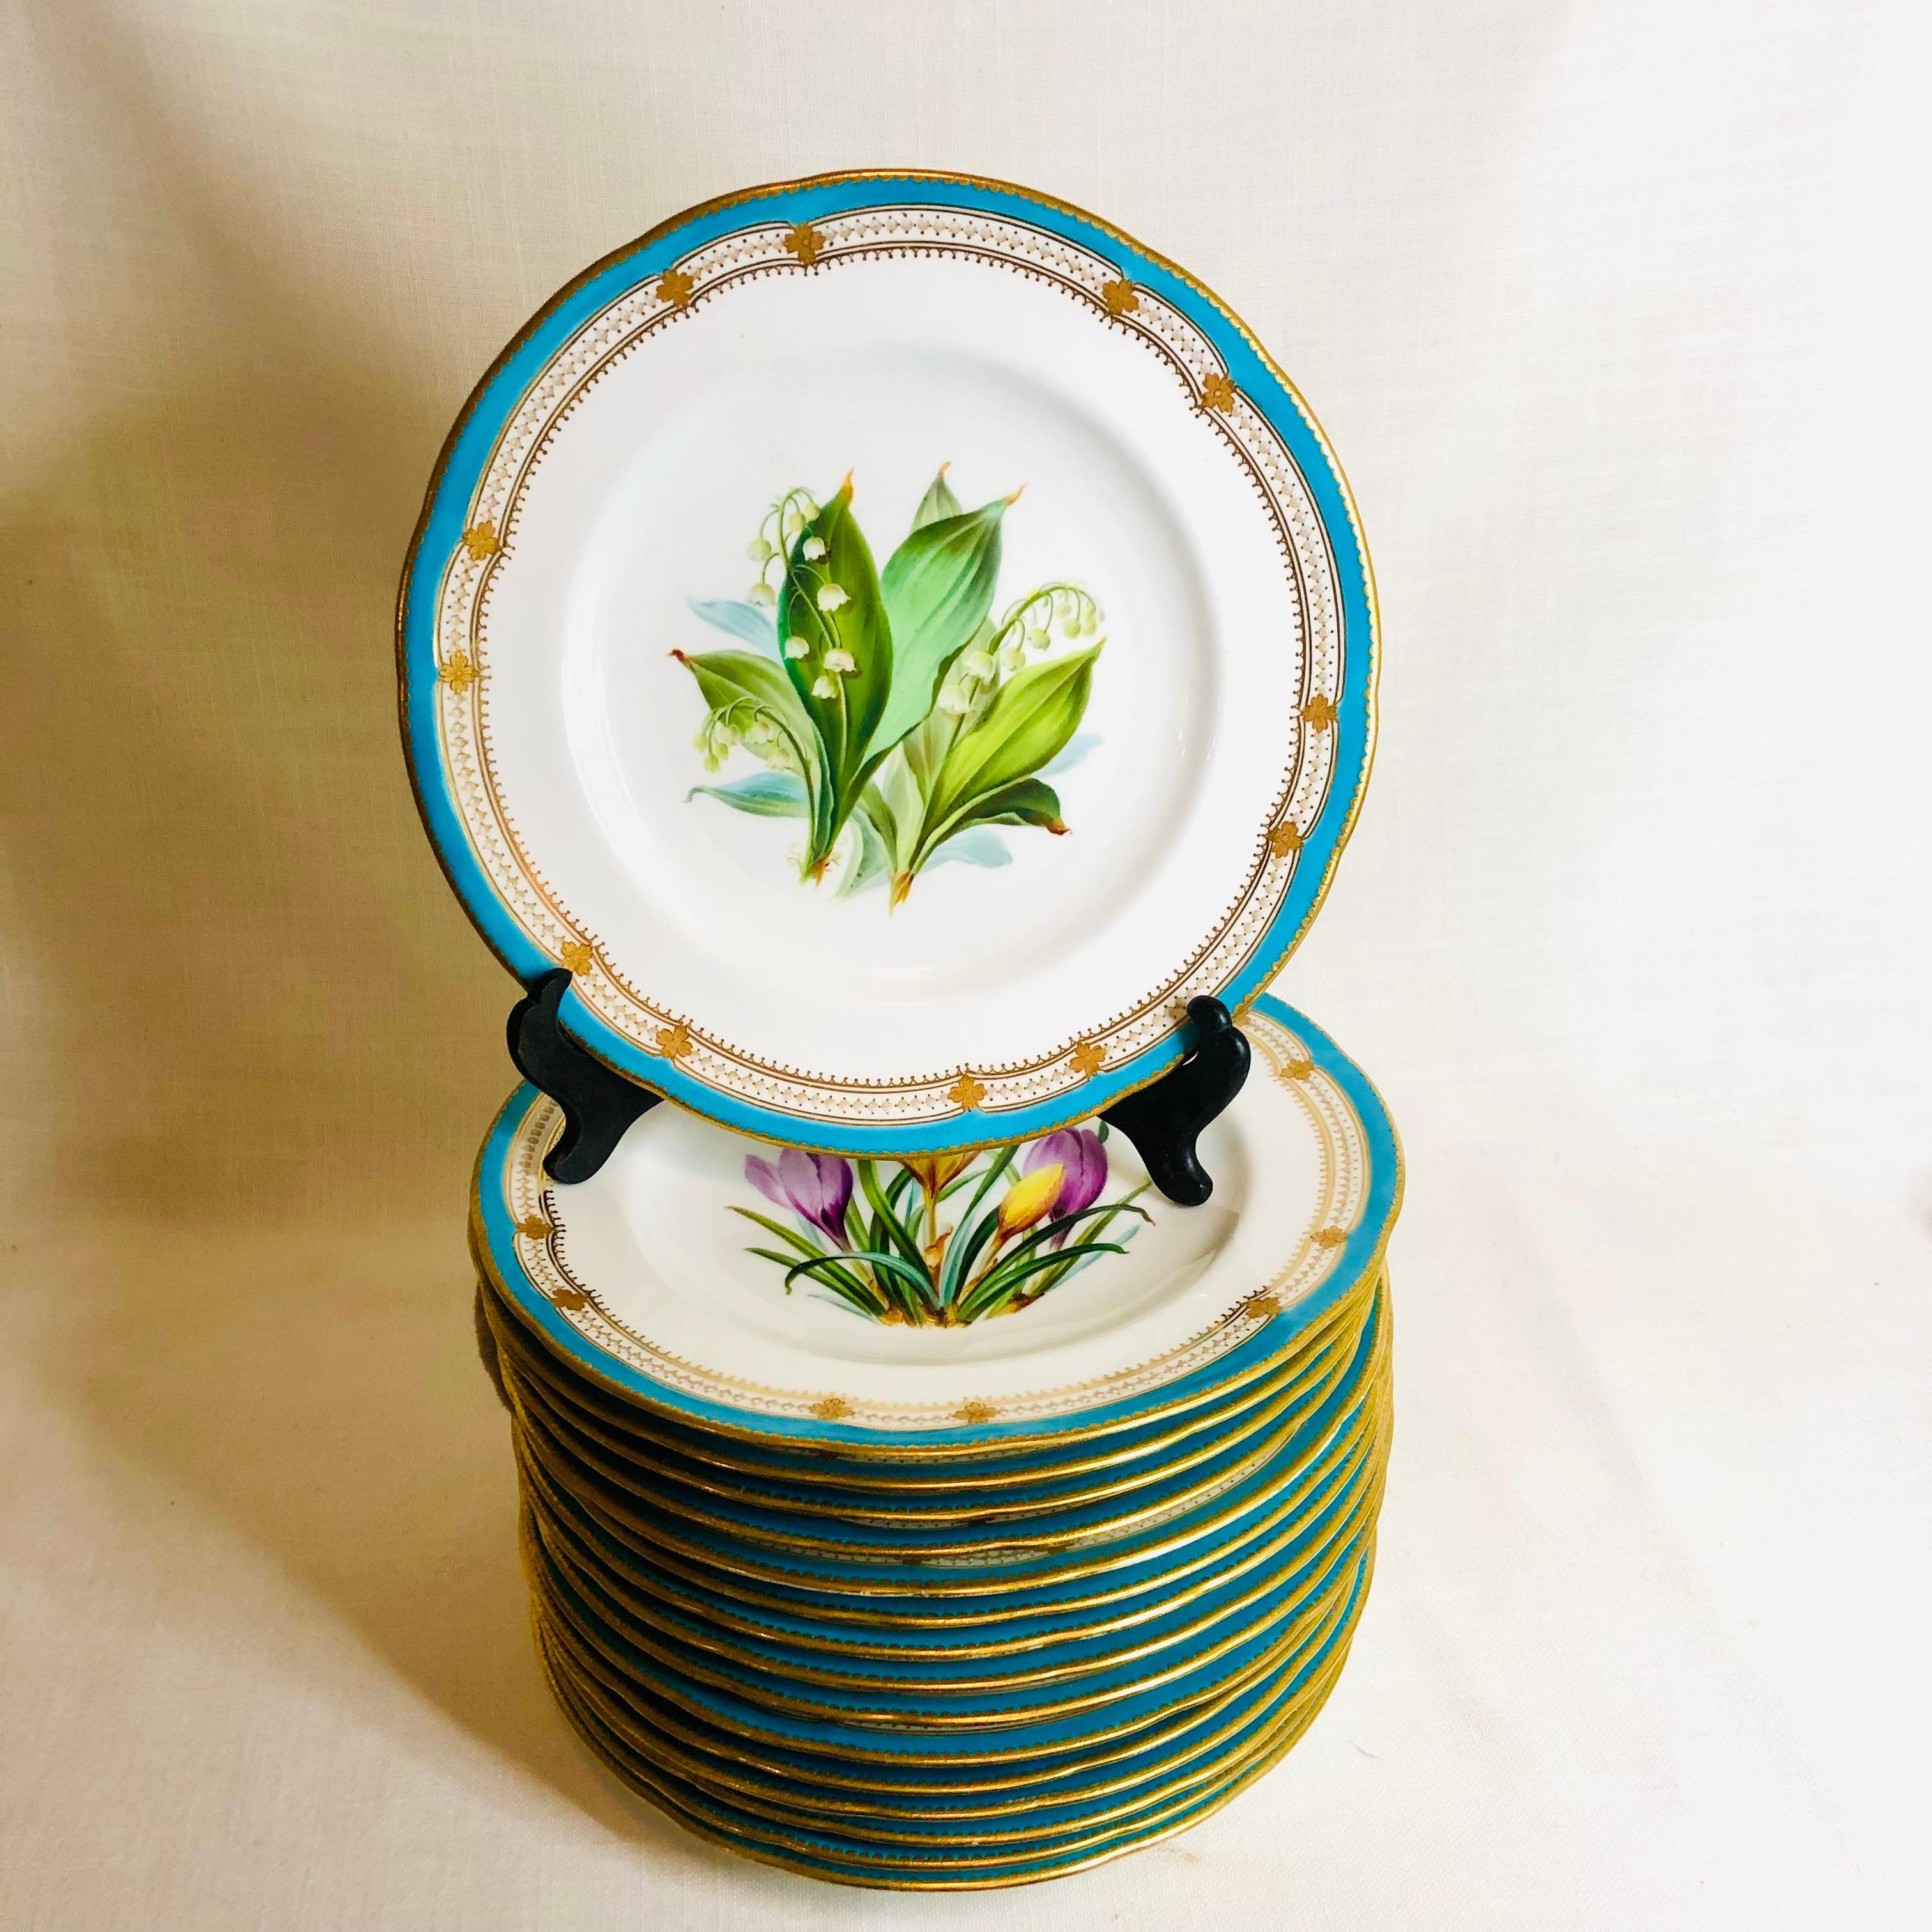 This is the most beautiful rare set of antique Minton dessert or luncheon plates. Each plate is painted with a different bouquet of flowers and each flower bouquet has museum quality painting, as you can see in the attached pictures. Each plate has